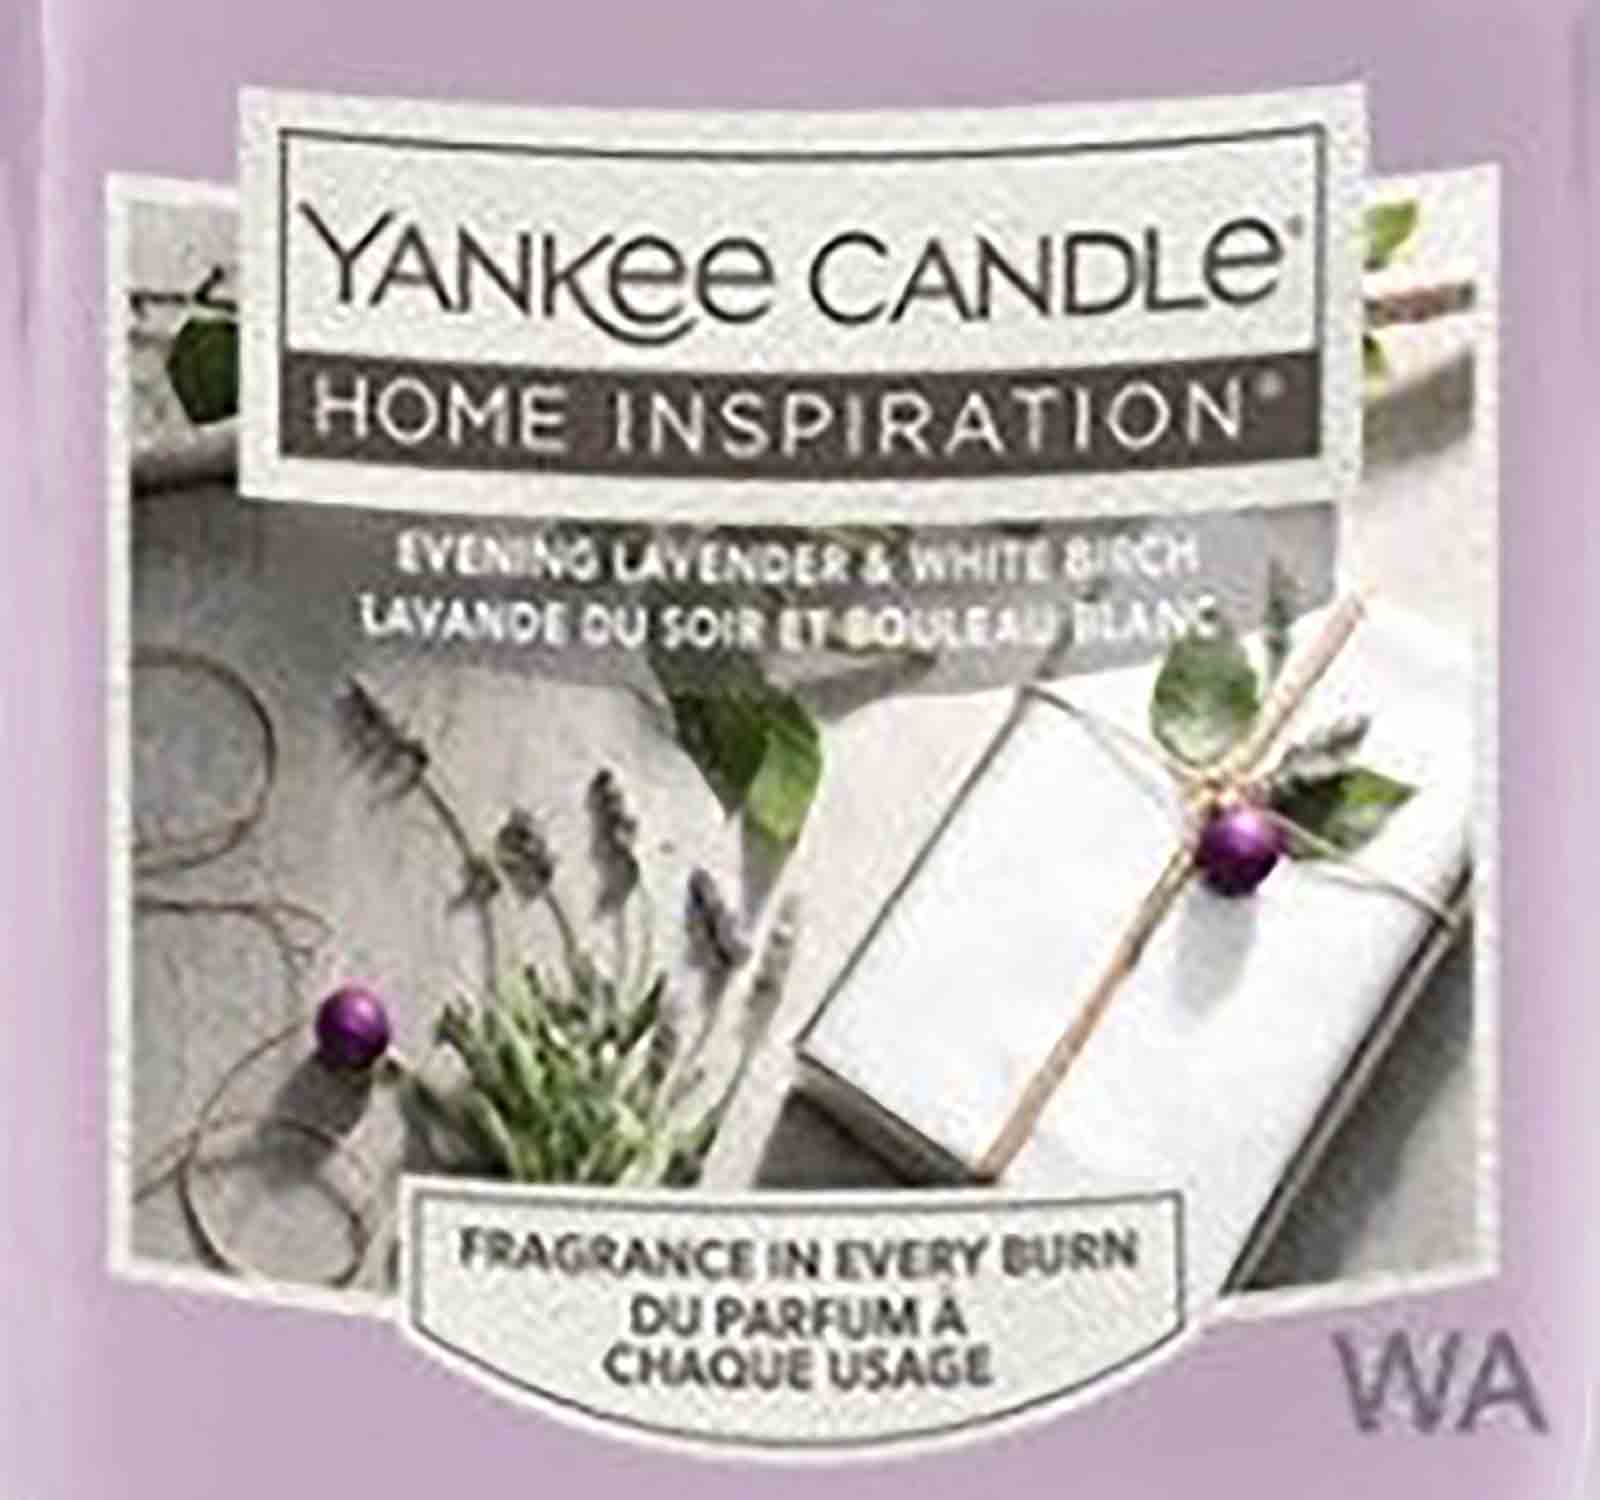 Yankee Candle Evening Lavender and White Birch 22g - Crumble vosk